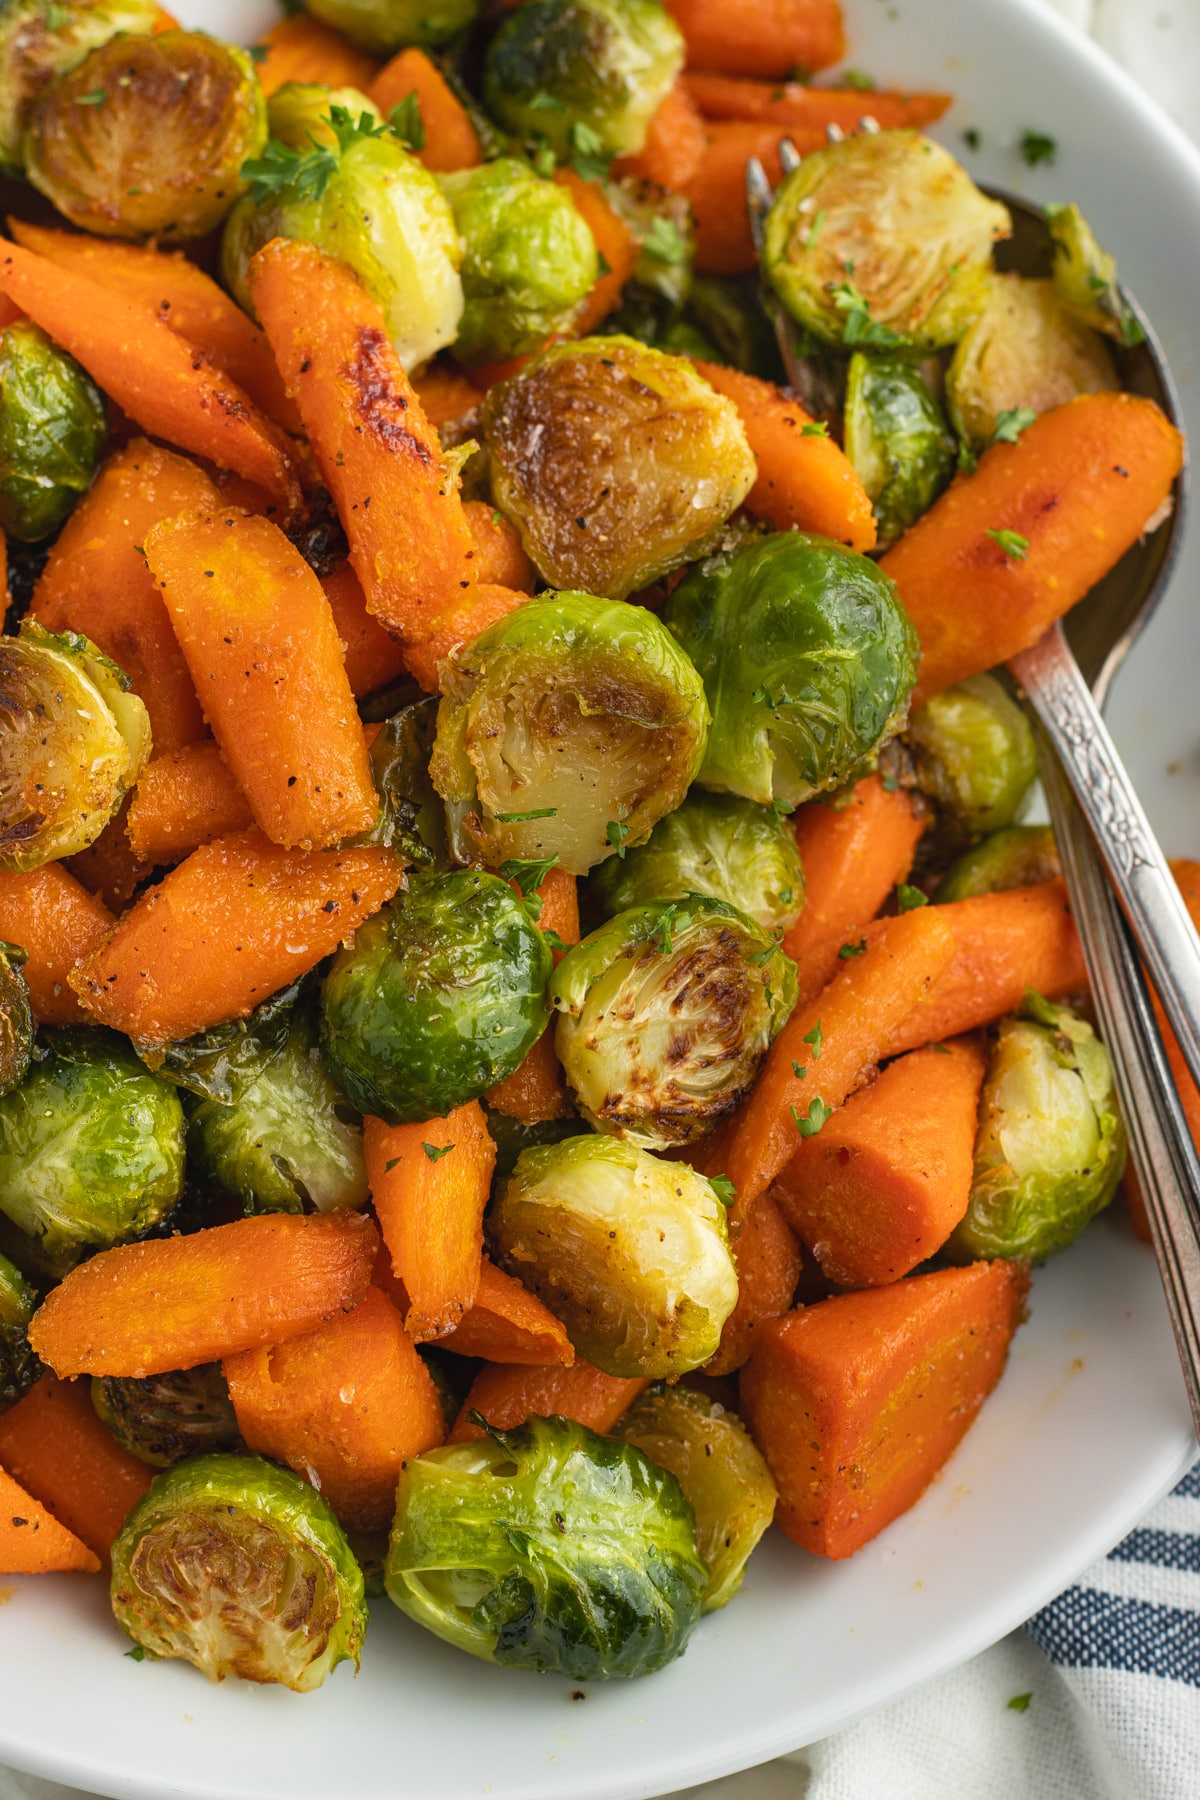 This is a close up picture of roasted veggies.